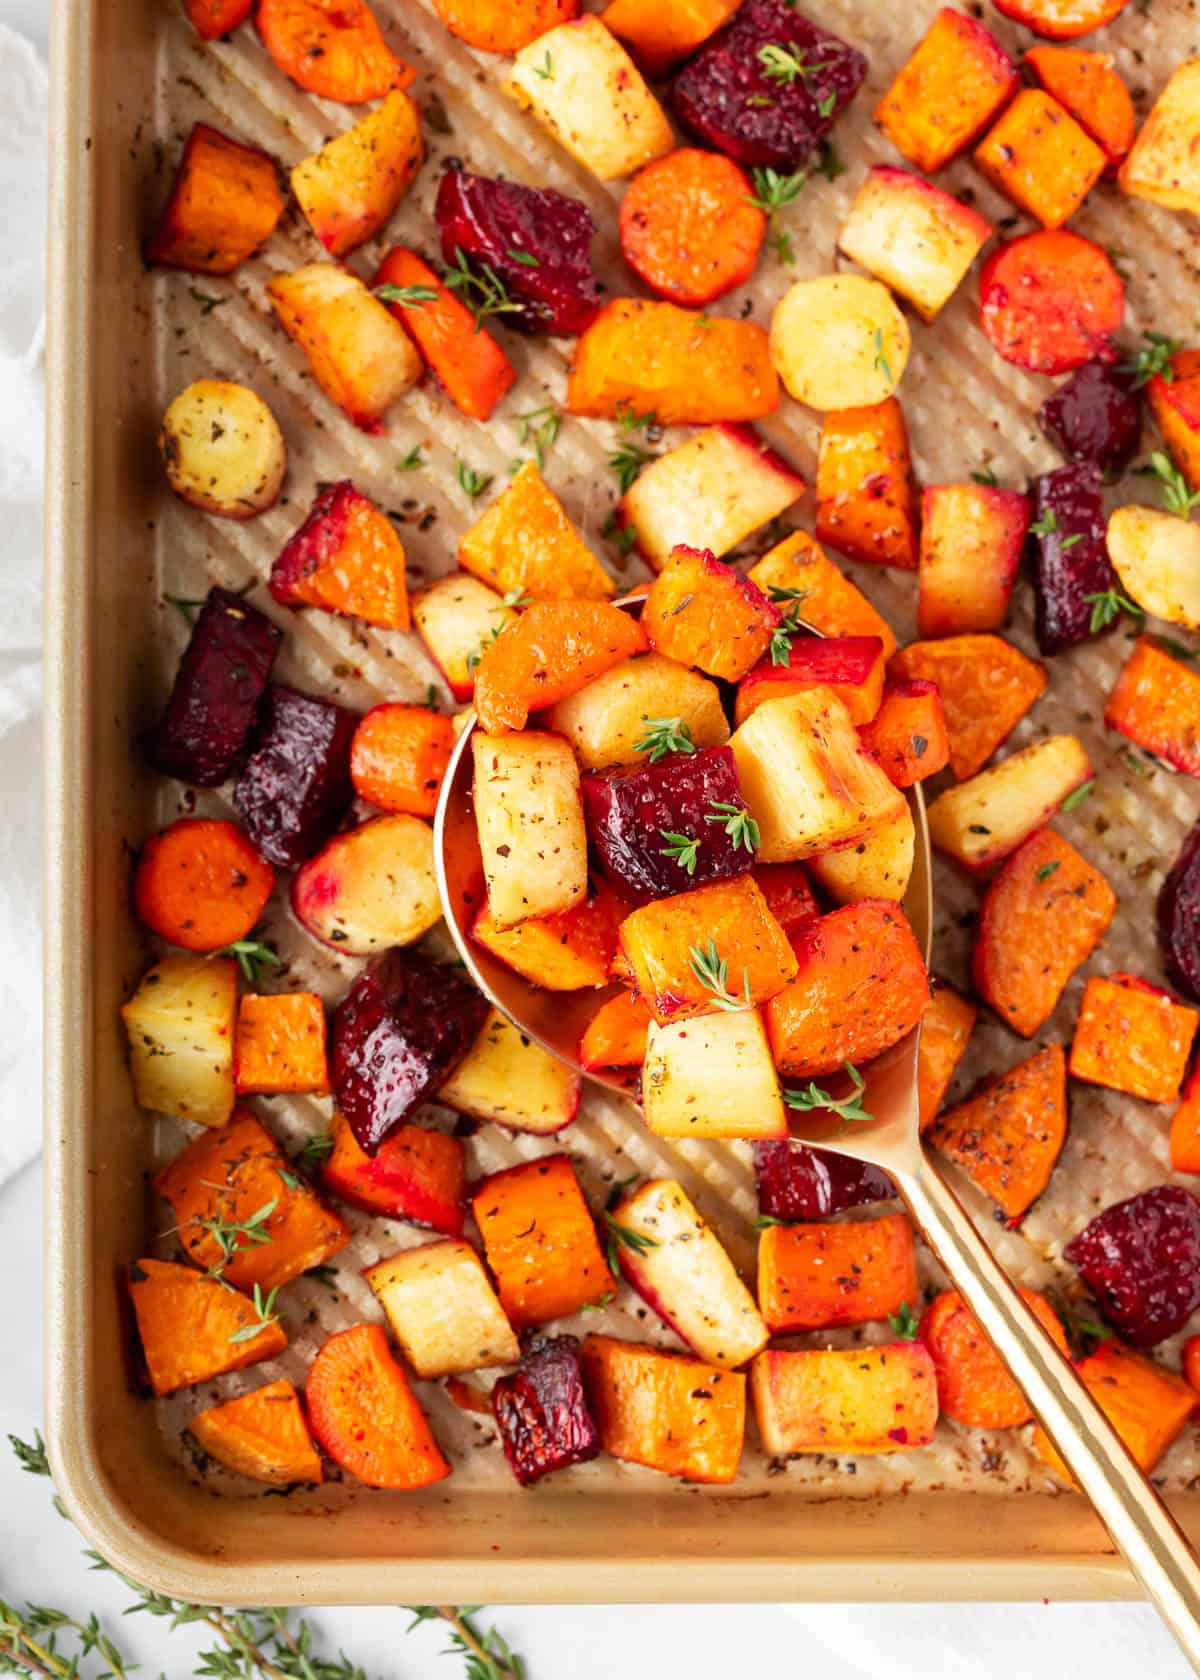 Roasted root vegetables cooking on a baking sheet.